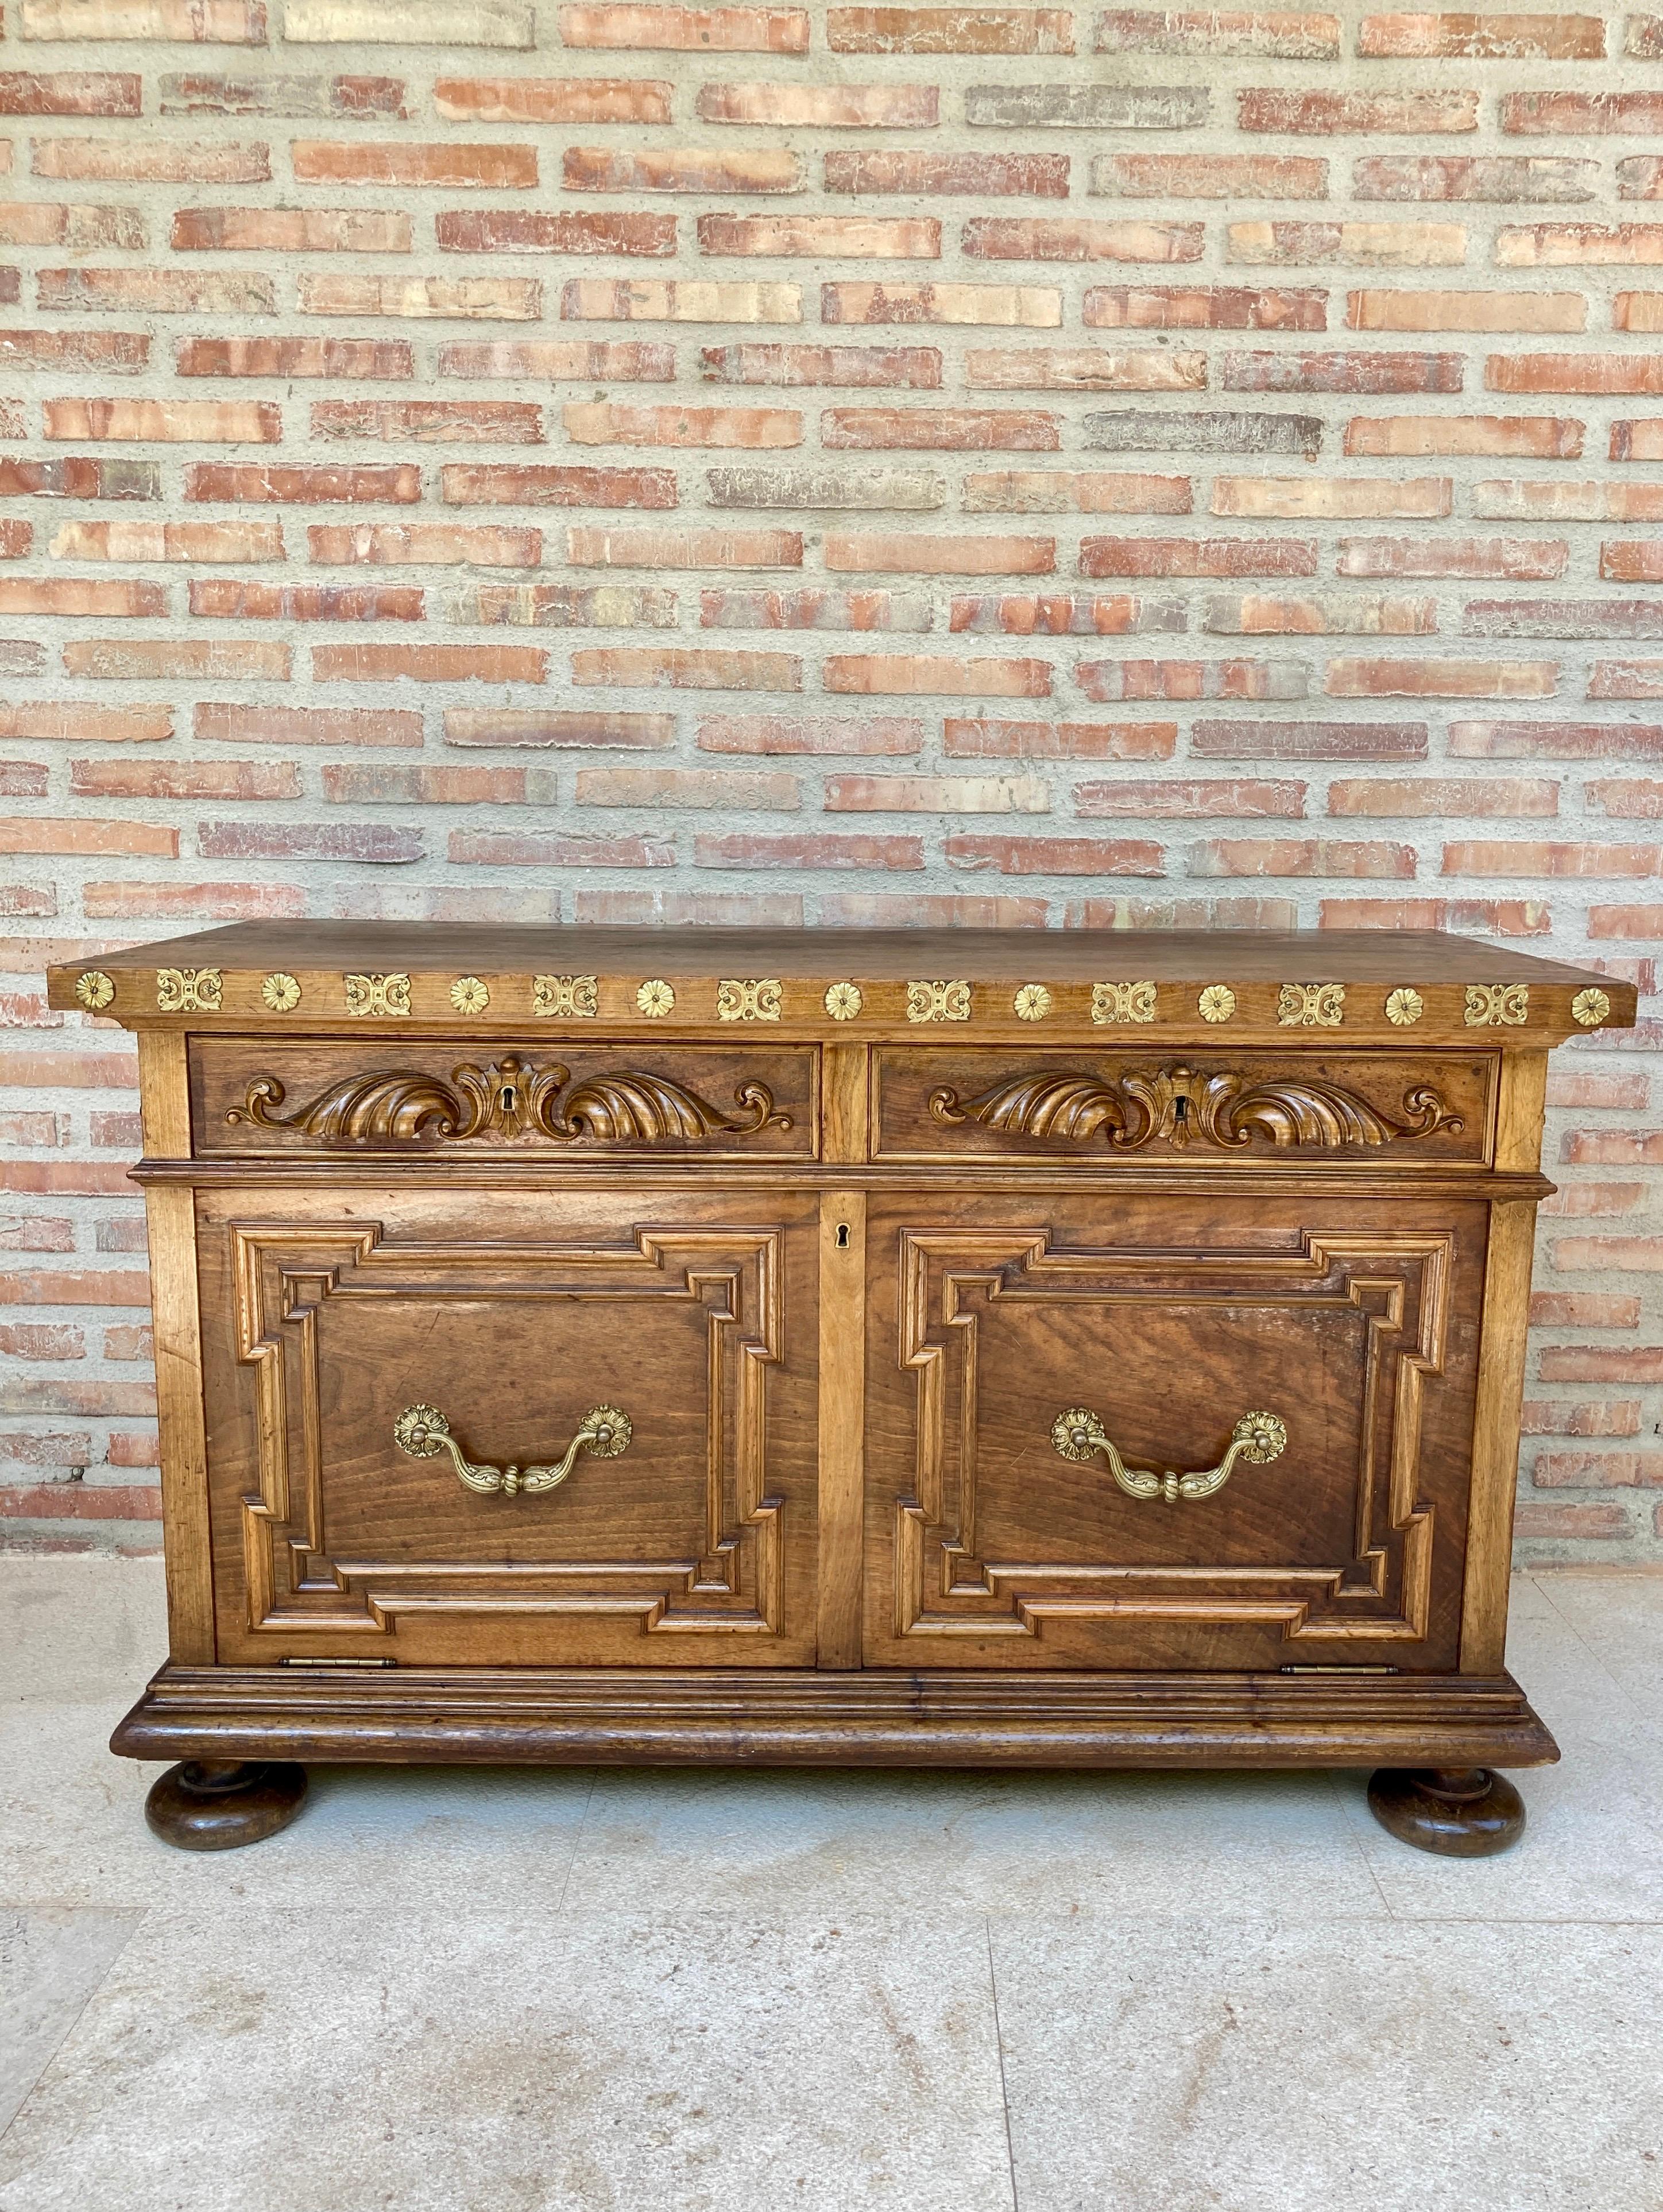 Carved wooden sideboard, with two drawers on the waist and a lower door, mid-century. With gilt bronze applications. On lentil legs. This piece of furniture has been restored. It is in very good condition It has 1 door and 2 functional drawers.